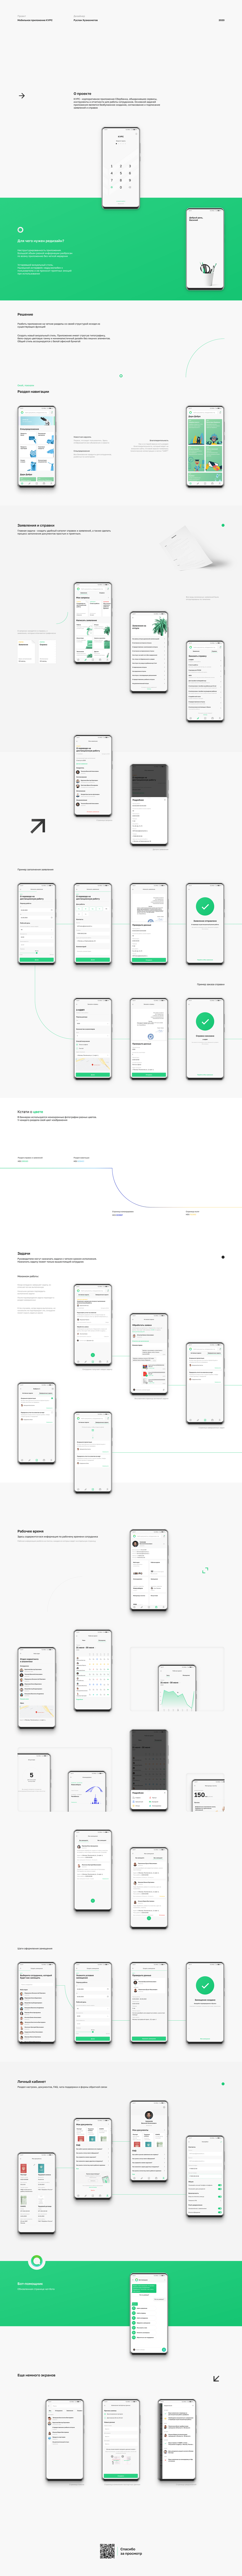 attendance mobile operating mode reference statement UI ux Сбербанк